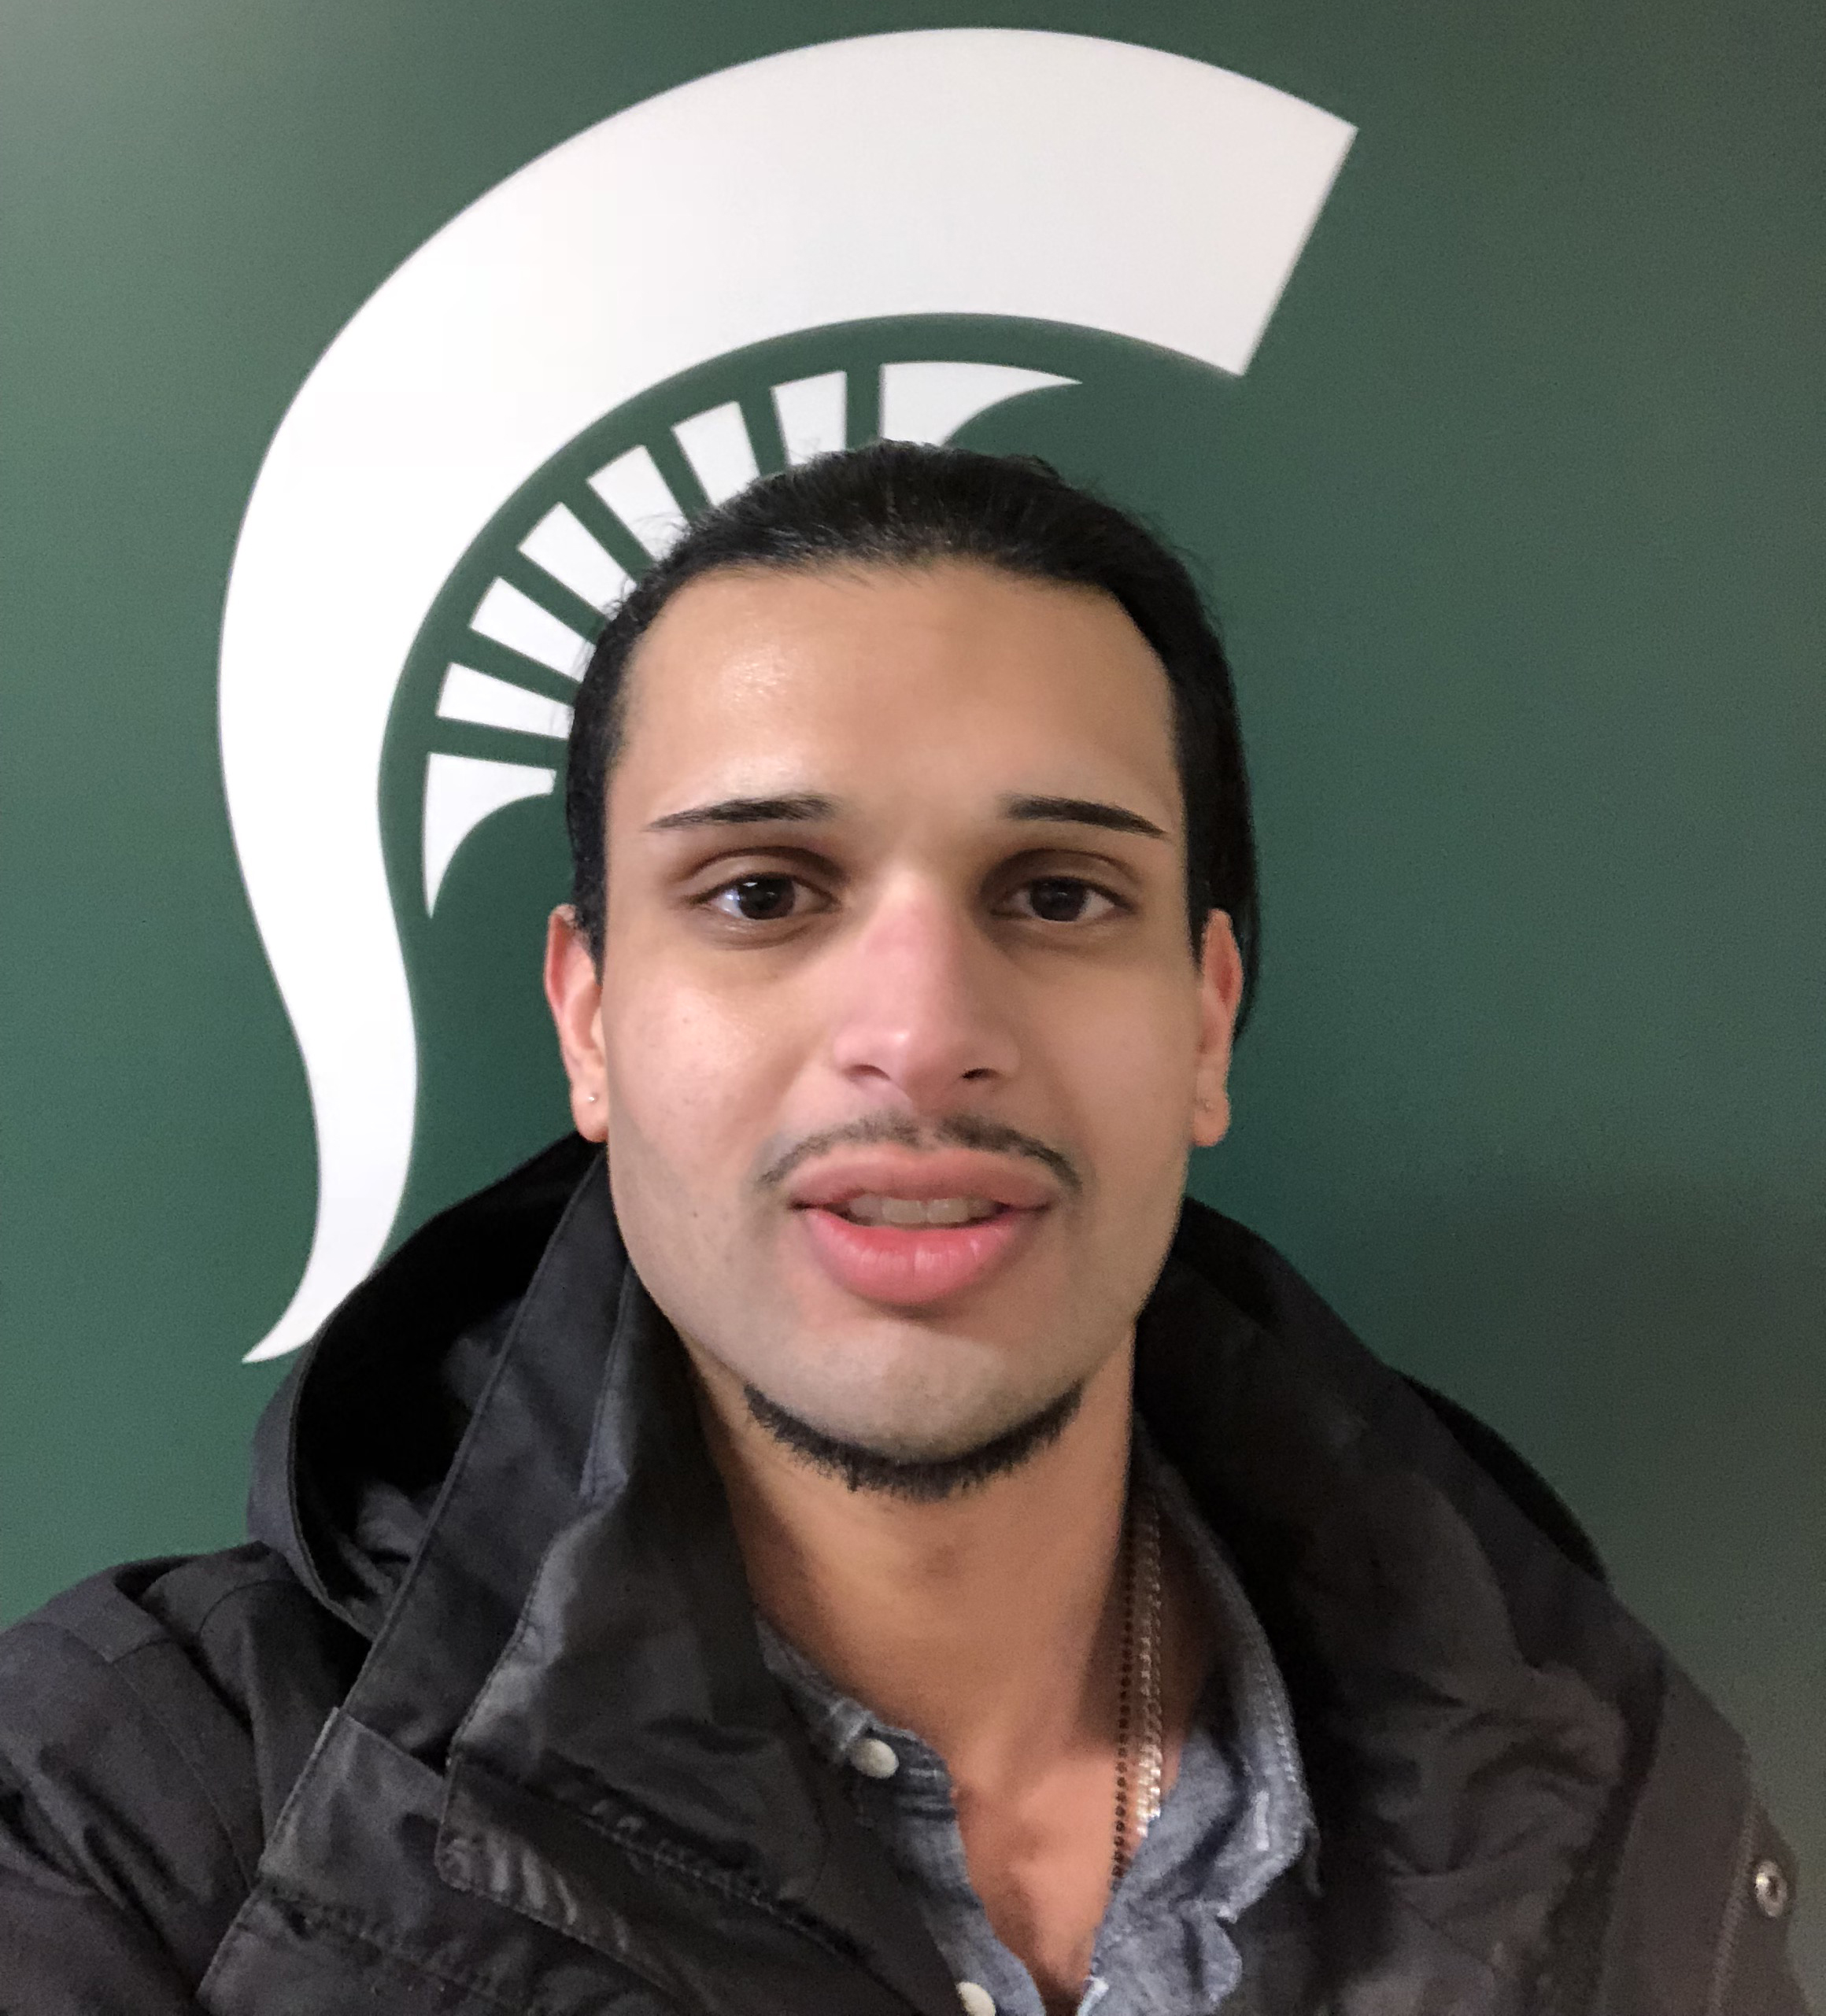 Photo of Neman H. standing in front of green and white Spartan Helmet logo